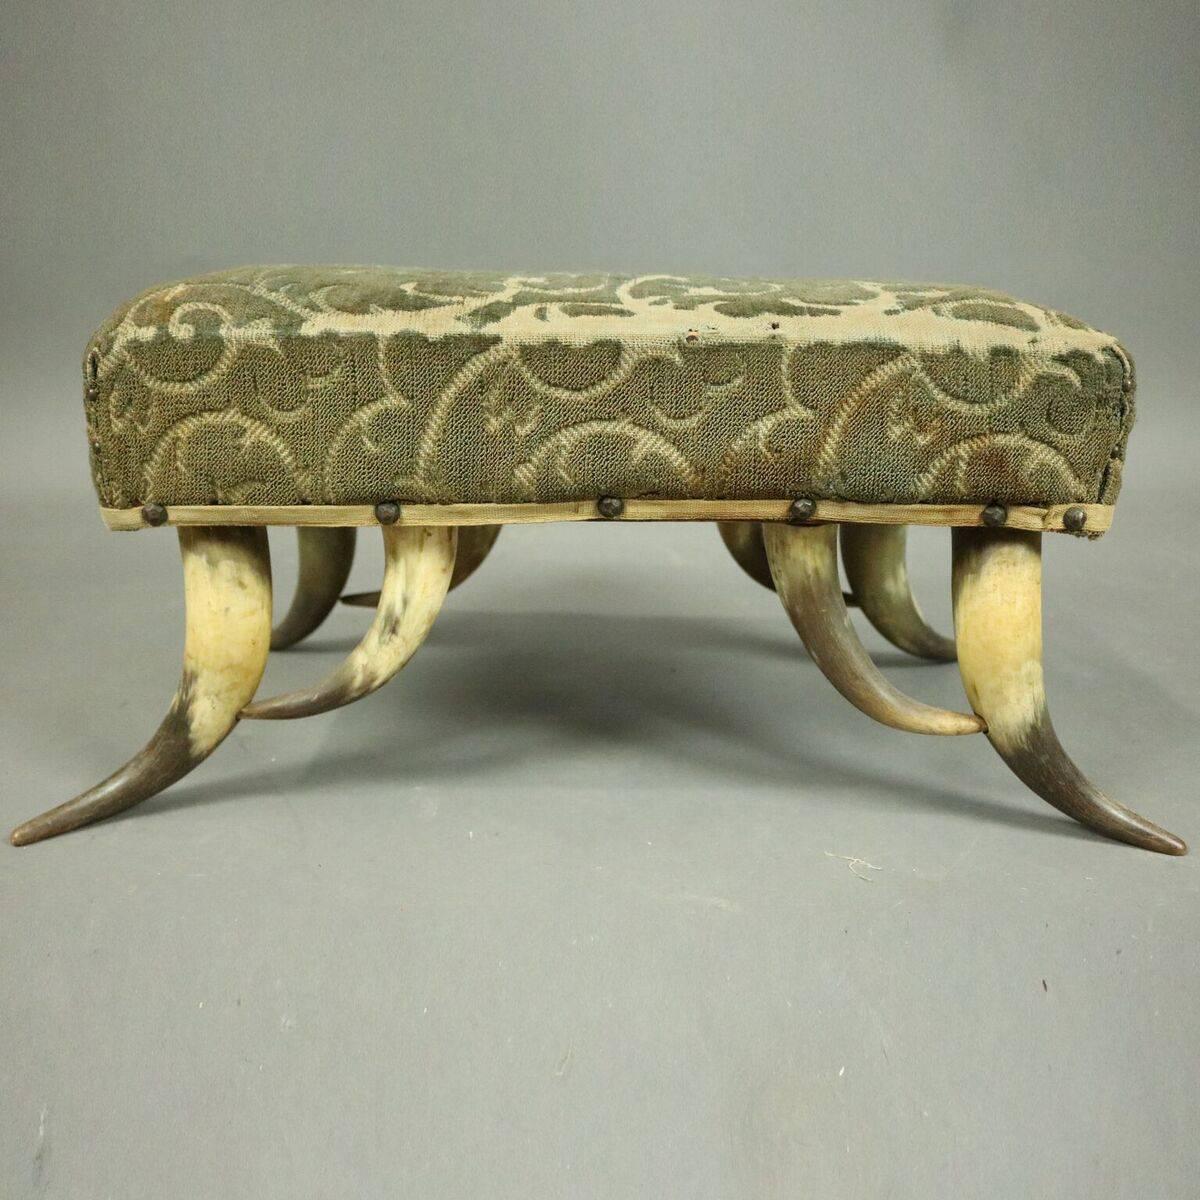 Antique Western footstool features cow Horn legs supporting upholstered upper,
circa 1910.

Measures: 9.5" H x 23" W x 12" D.